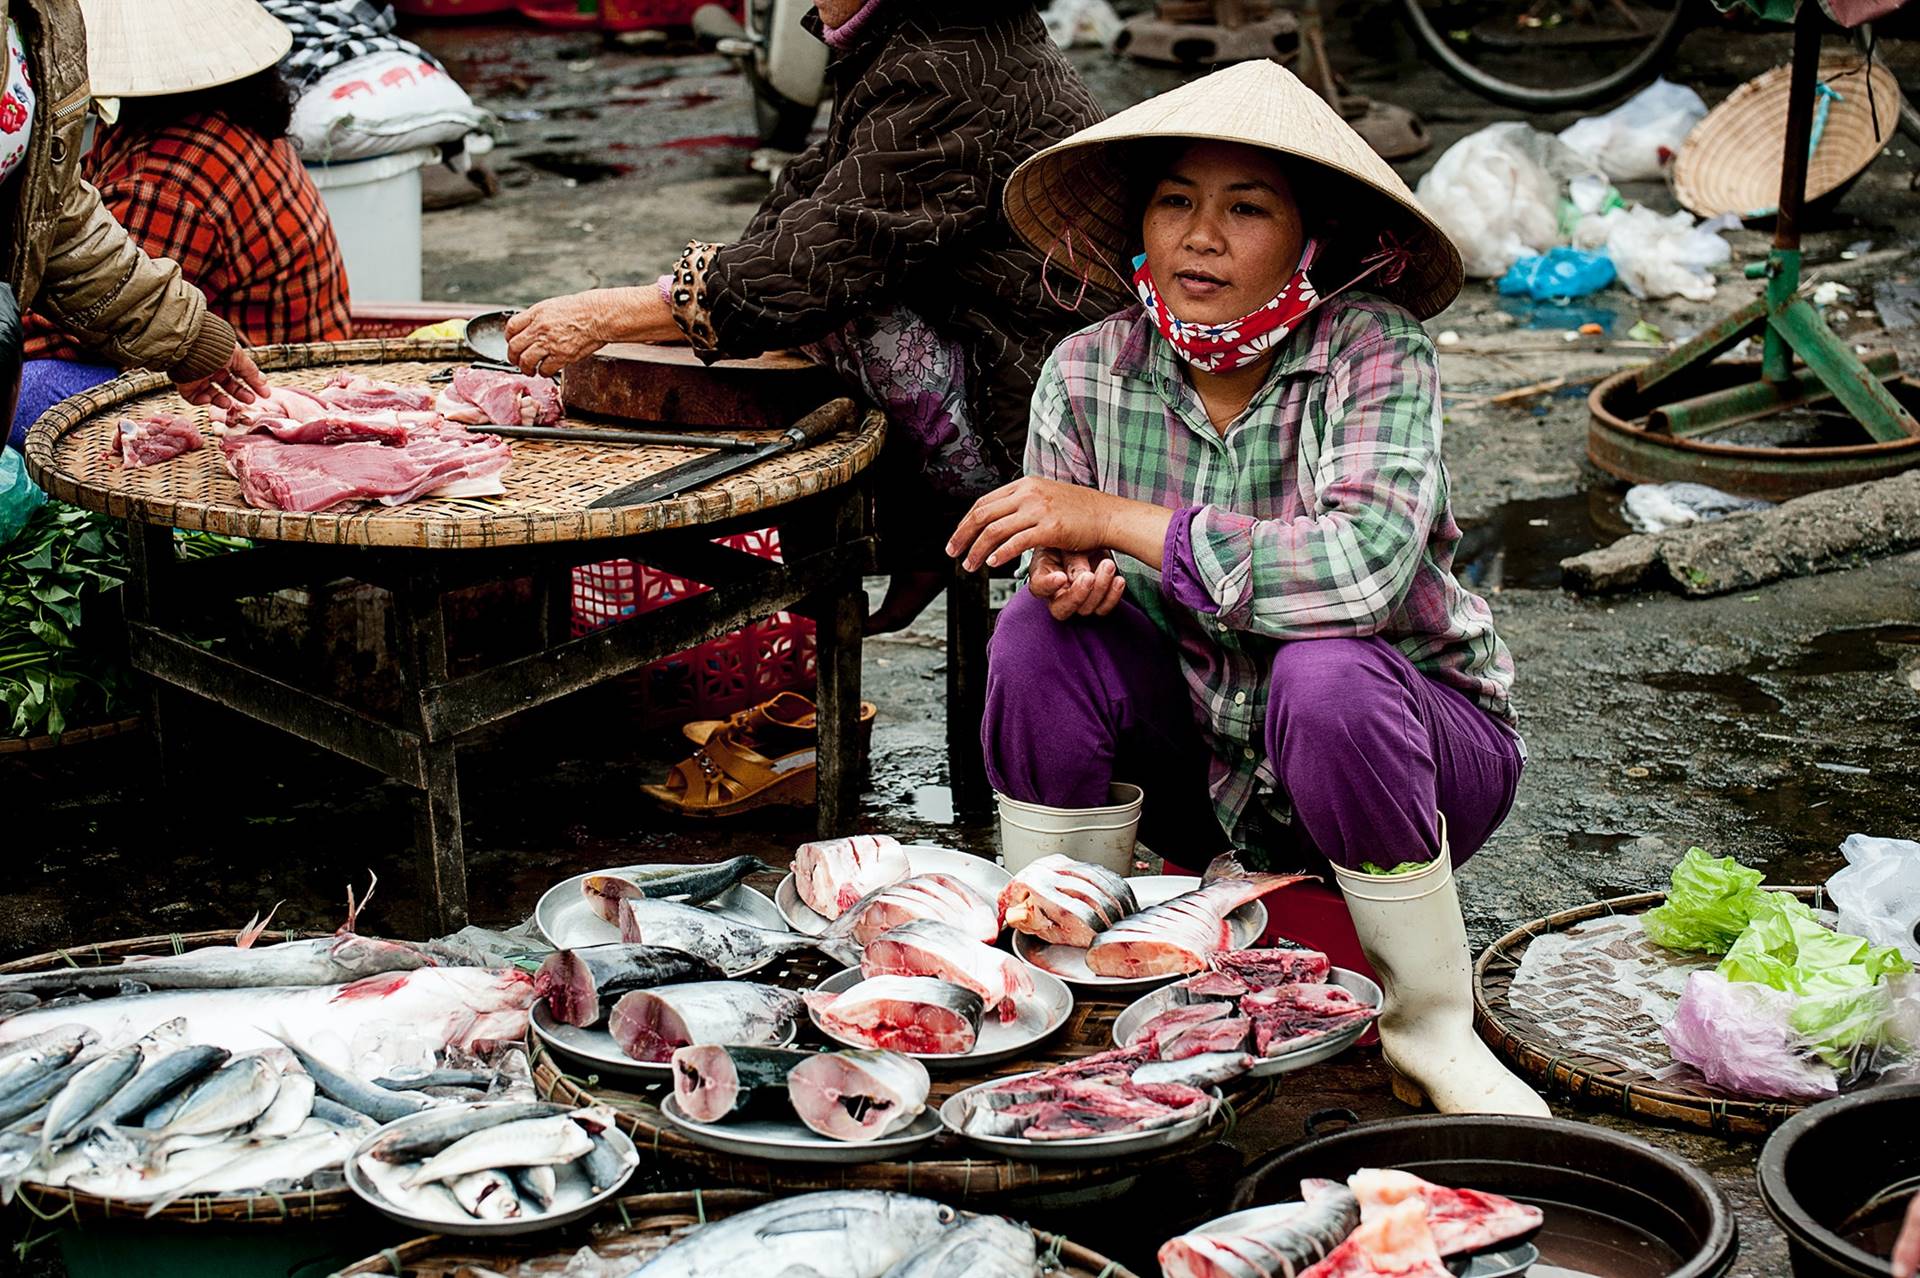 MAR Advisors to enhance profitability and quality of seafood in Vietnam with support from SDGs fund - mynd